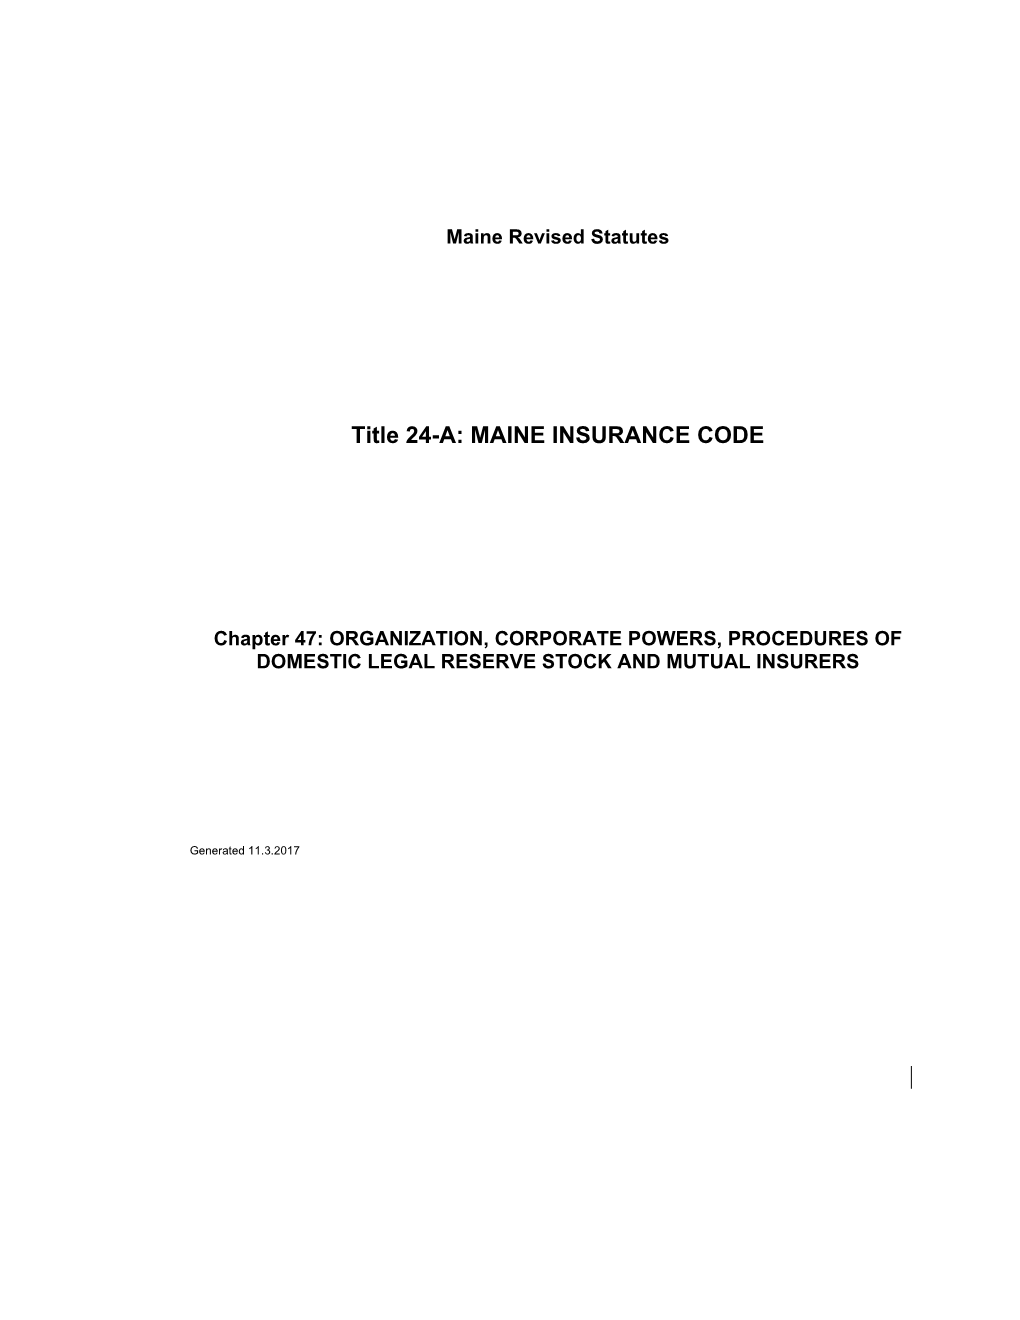 MRS Title 24-A 3306. INCORPORATION of DOMESTIC STOCK, MUTUAL INSURERS